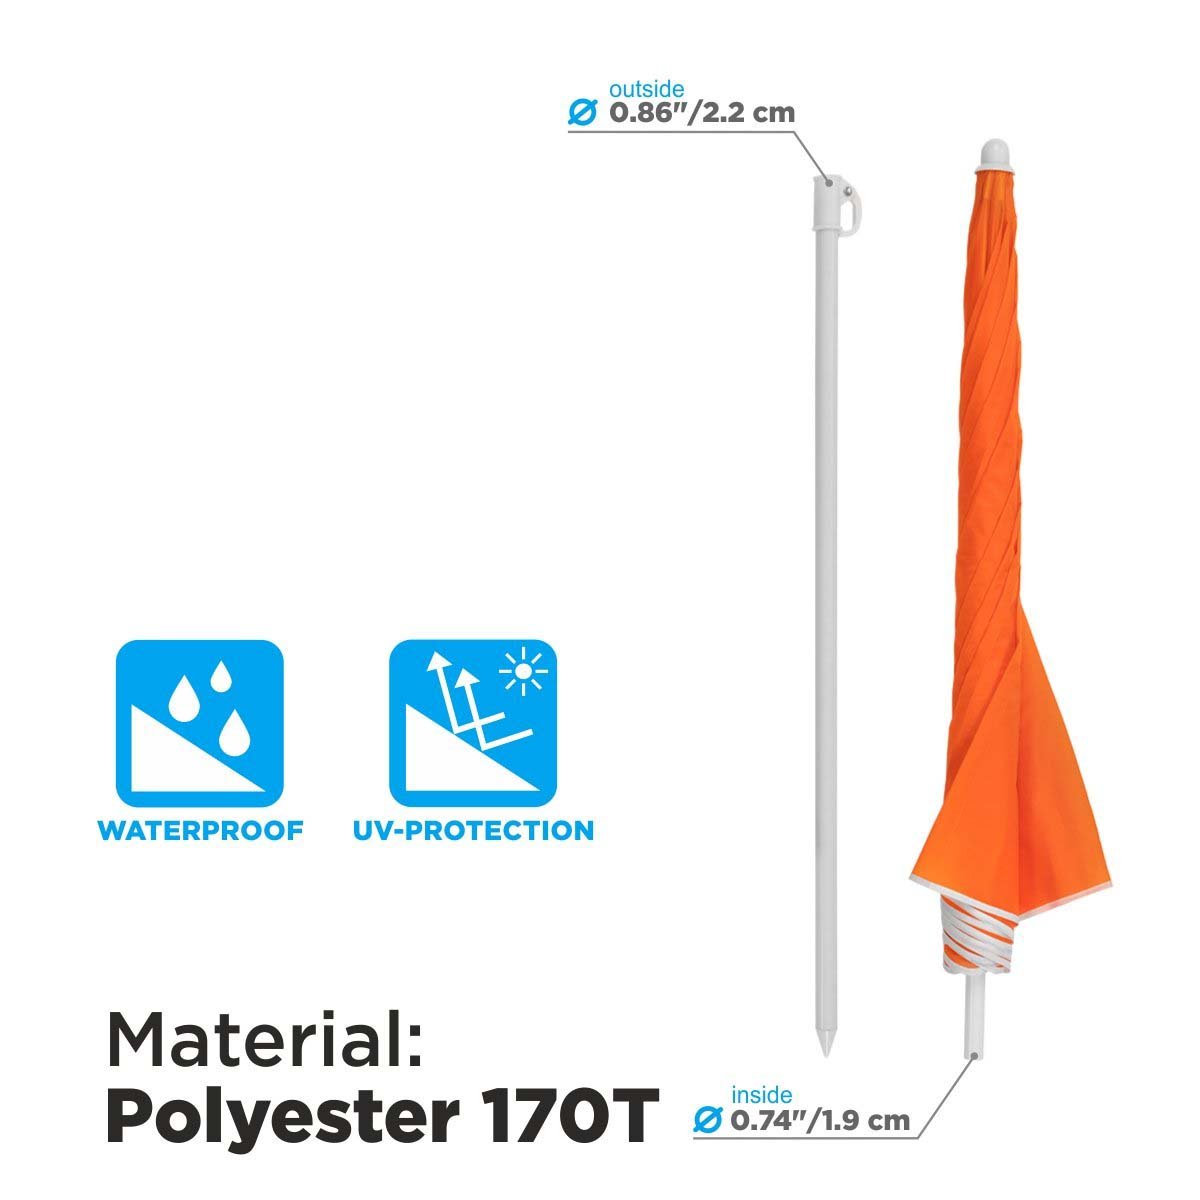 Orange Folding Beach Umbrella is made of waterproof polyester 170T featuring UV protection